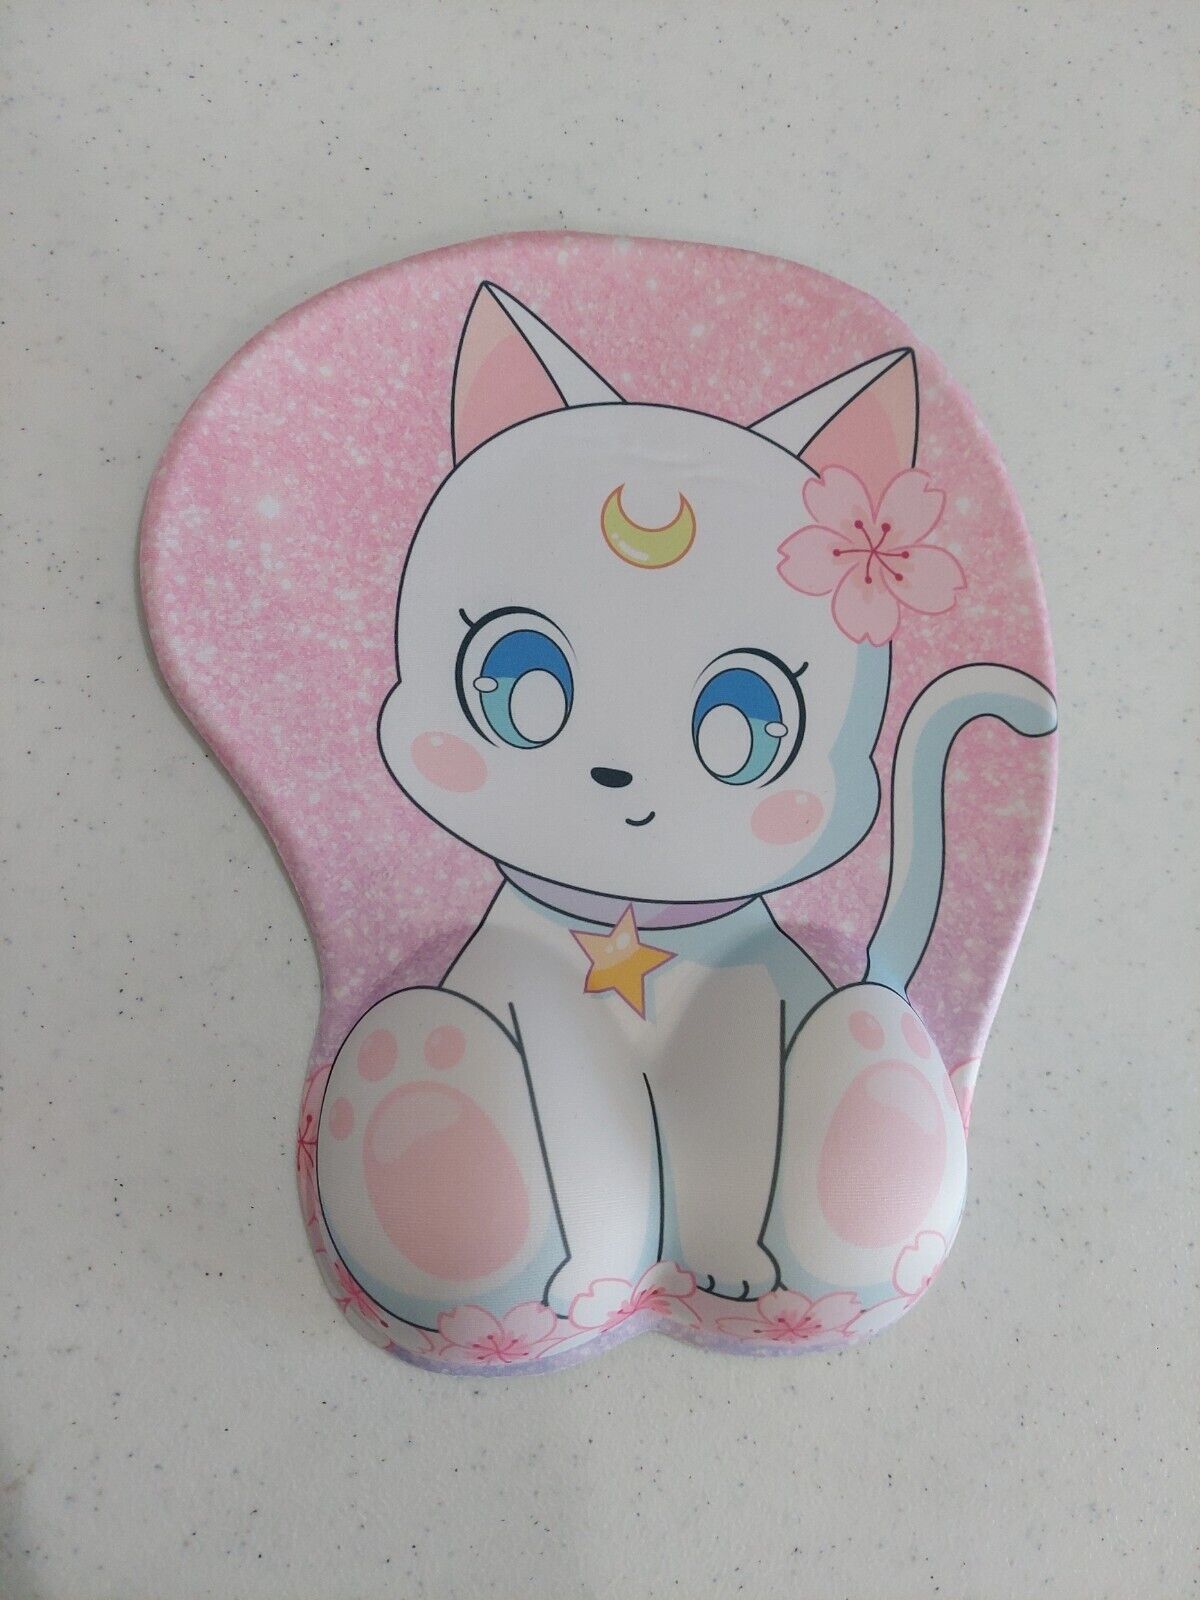 NEW Sailor Moon Artemis Kitty Cat Wrist Support PC Mouse Pad Anime Manga Scout